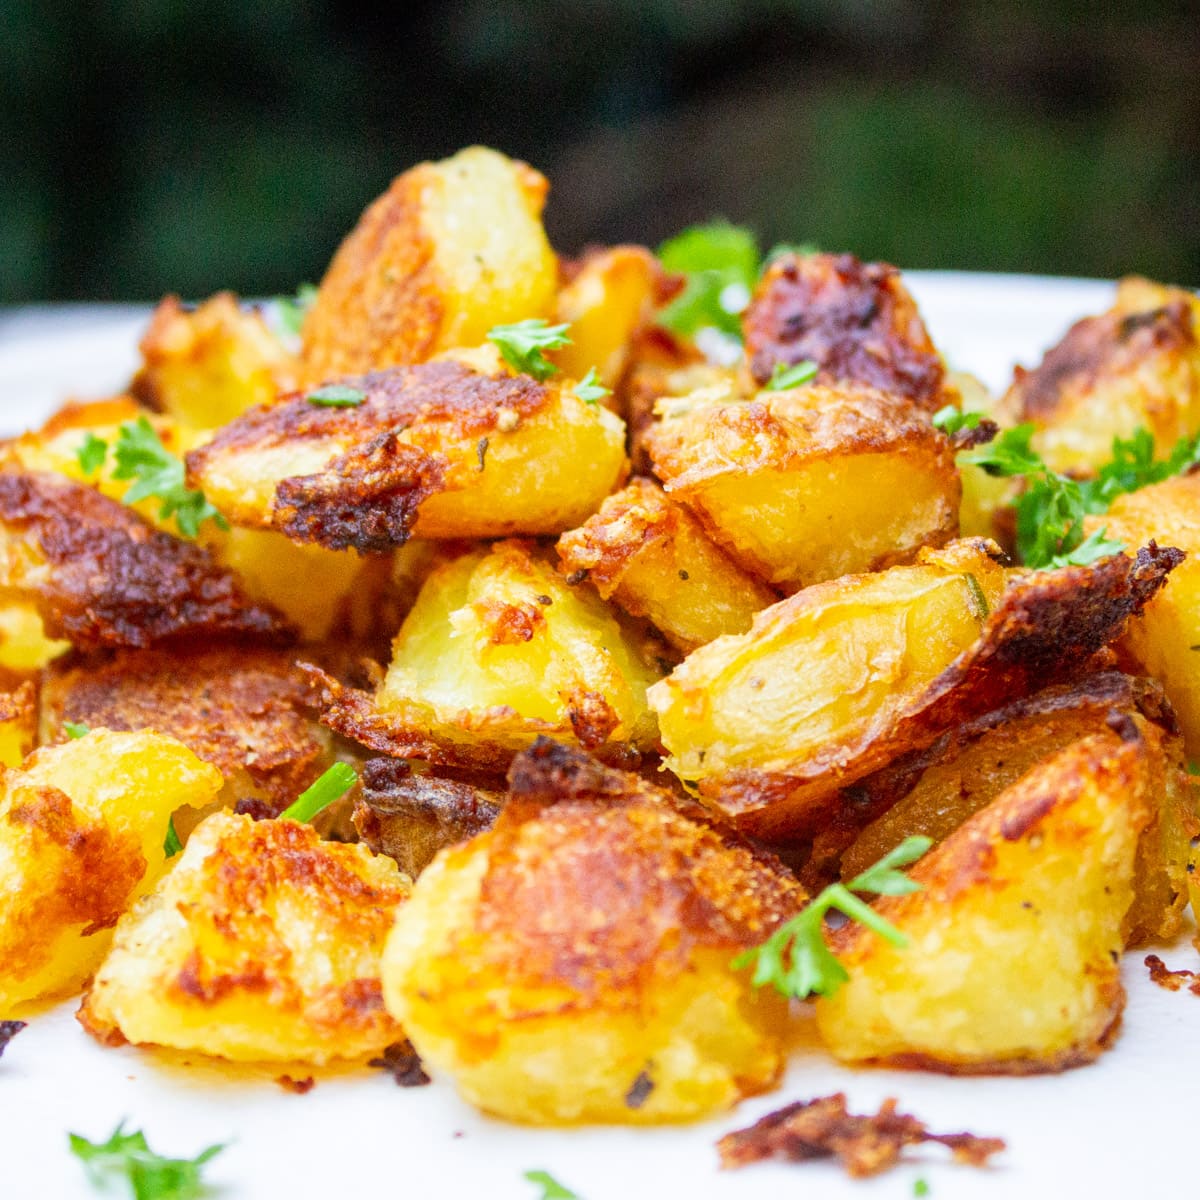 roasted potatoes with parsley garnish on plate.